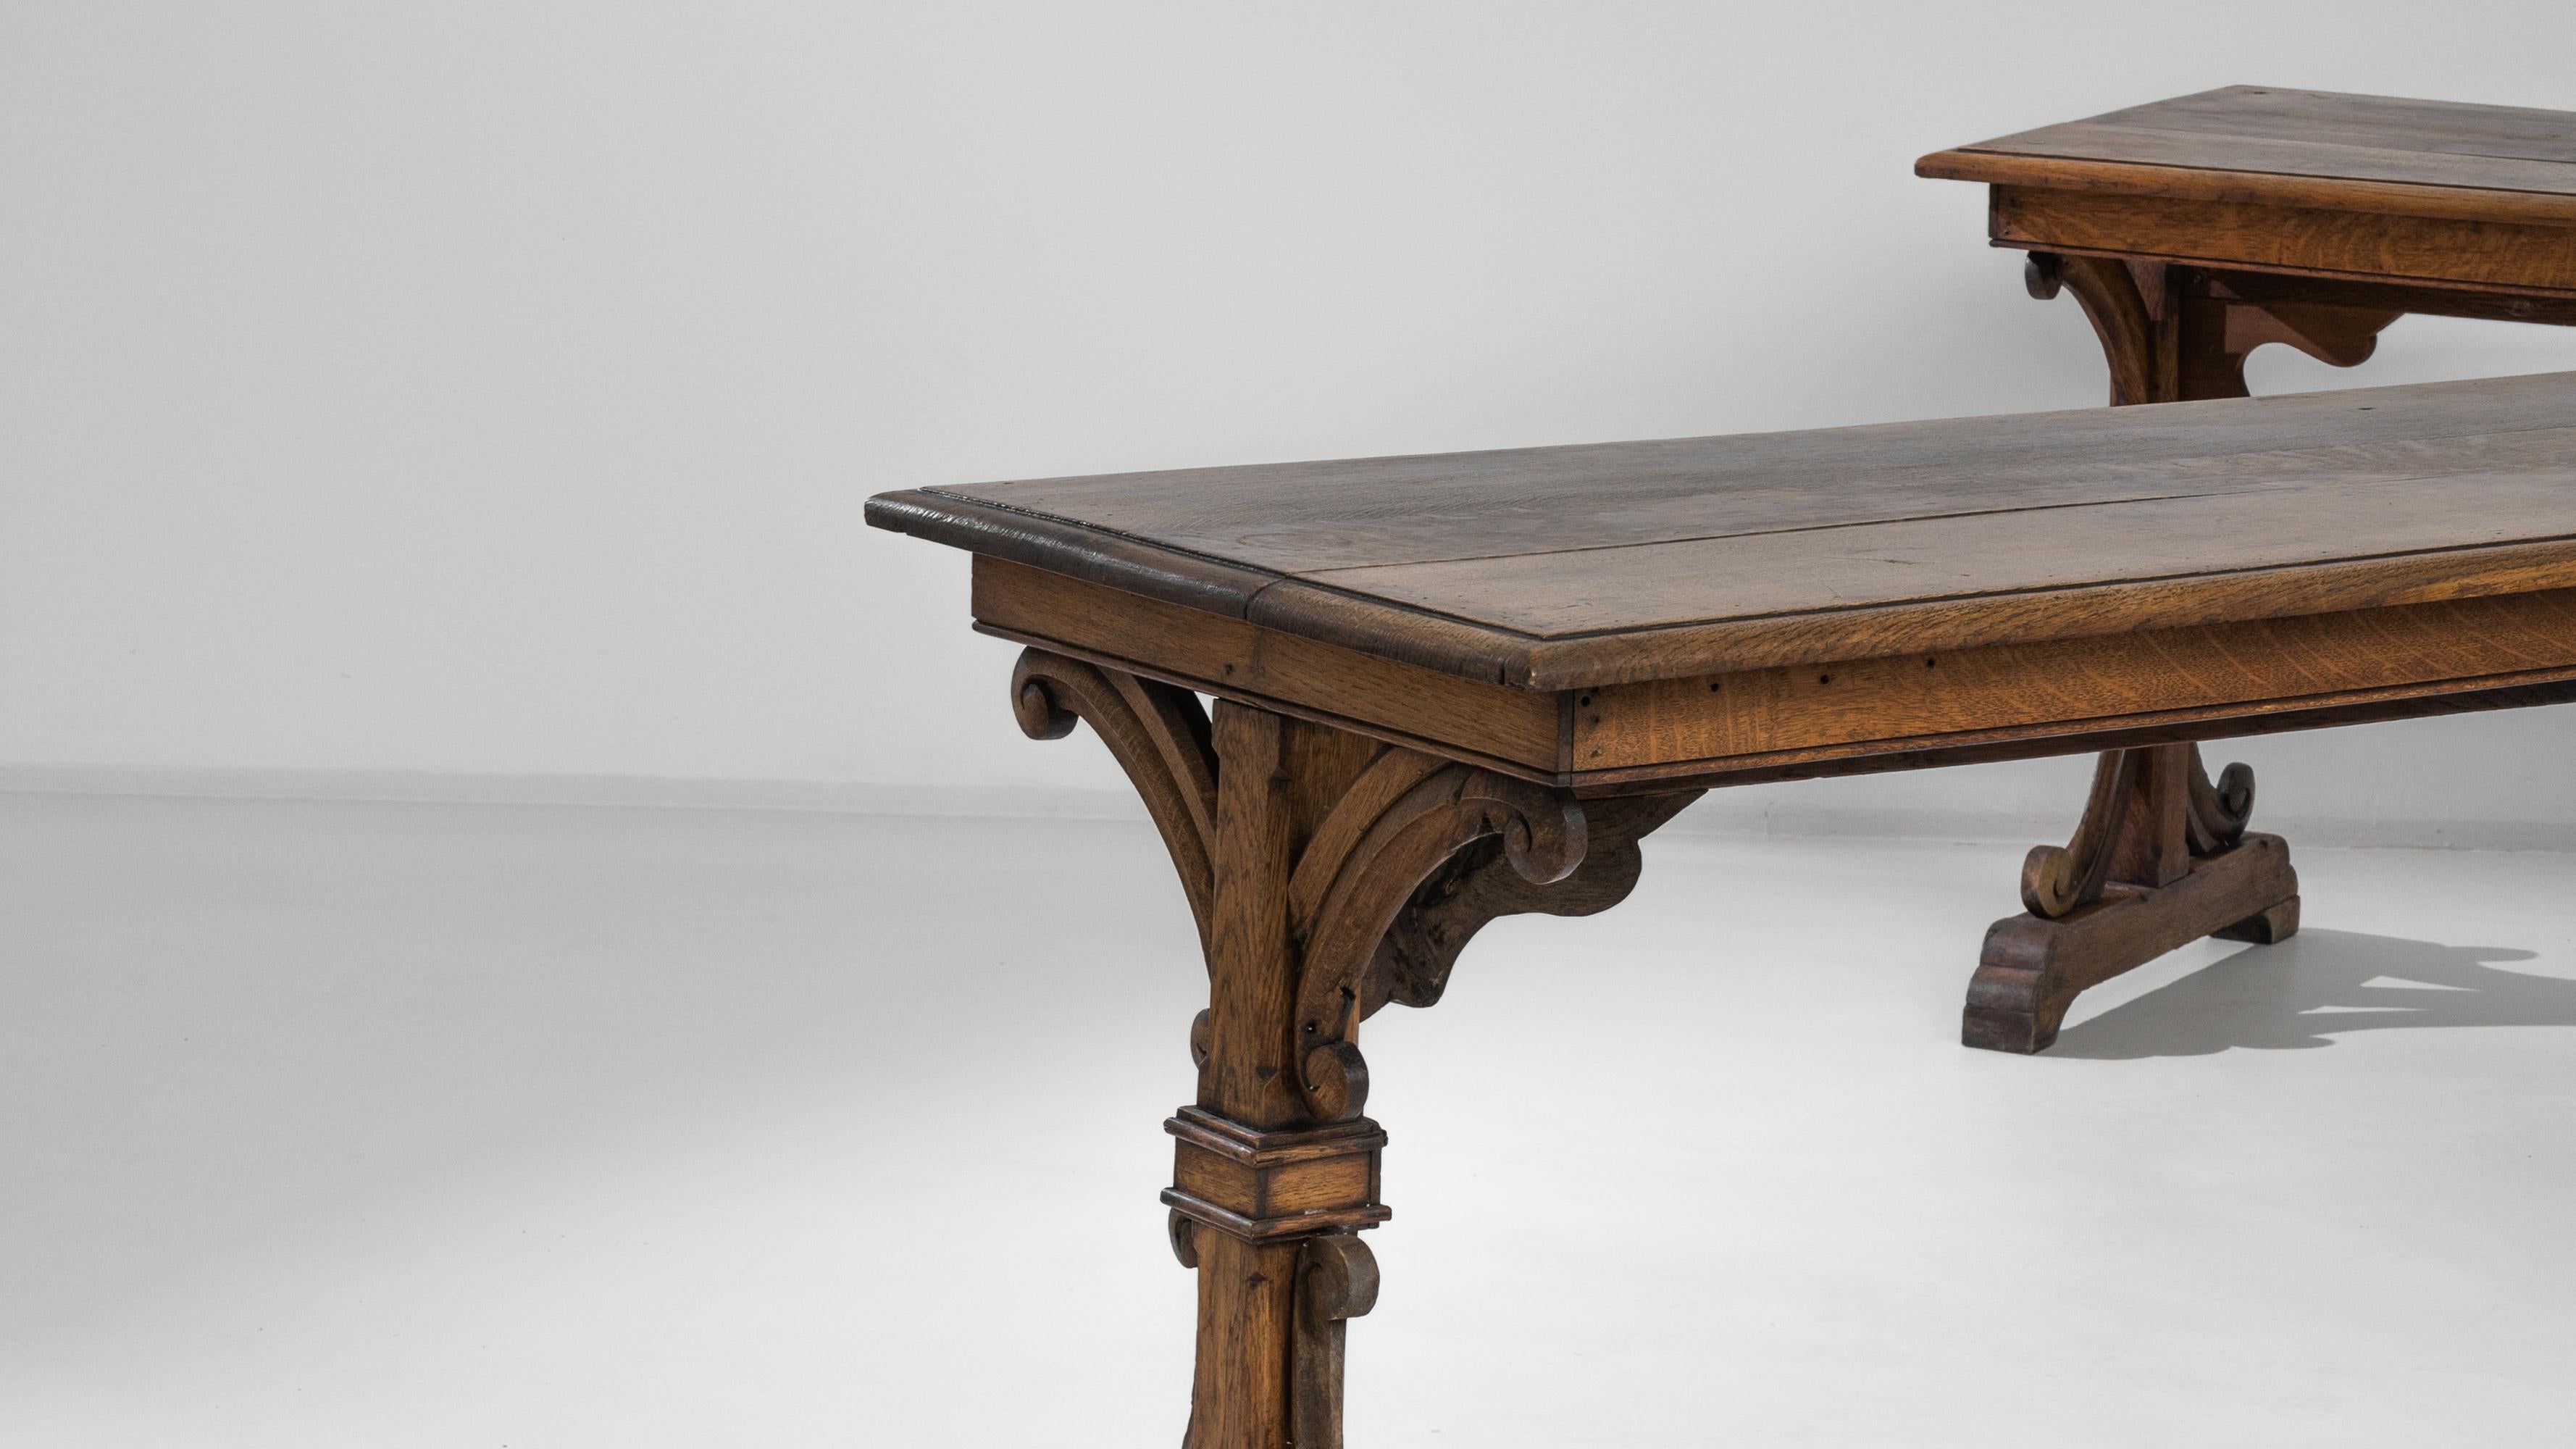 This beautiful pair of vintage wooden tables create a distinguished accent. Made by French furniture makers at the turn of the 20th Century. Carved scrolls bring embellishment and equilibrium to the trestle frame, while the rich hue of the original